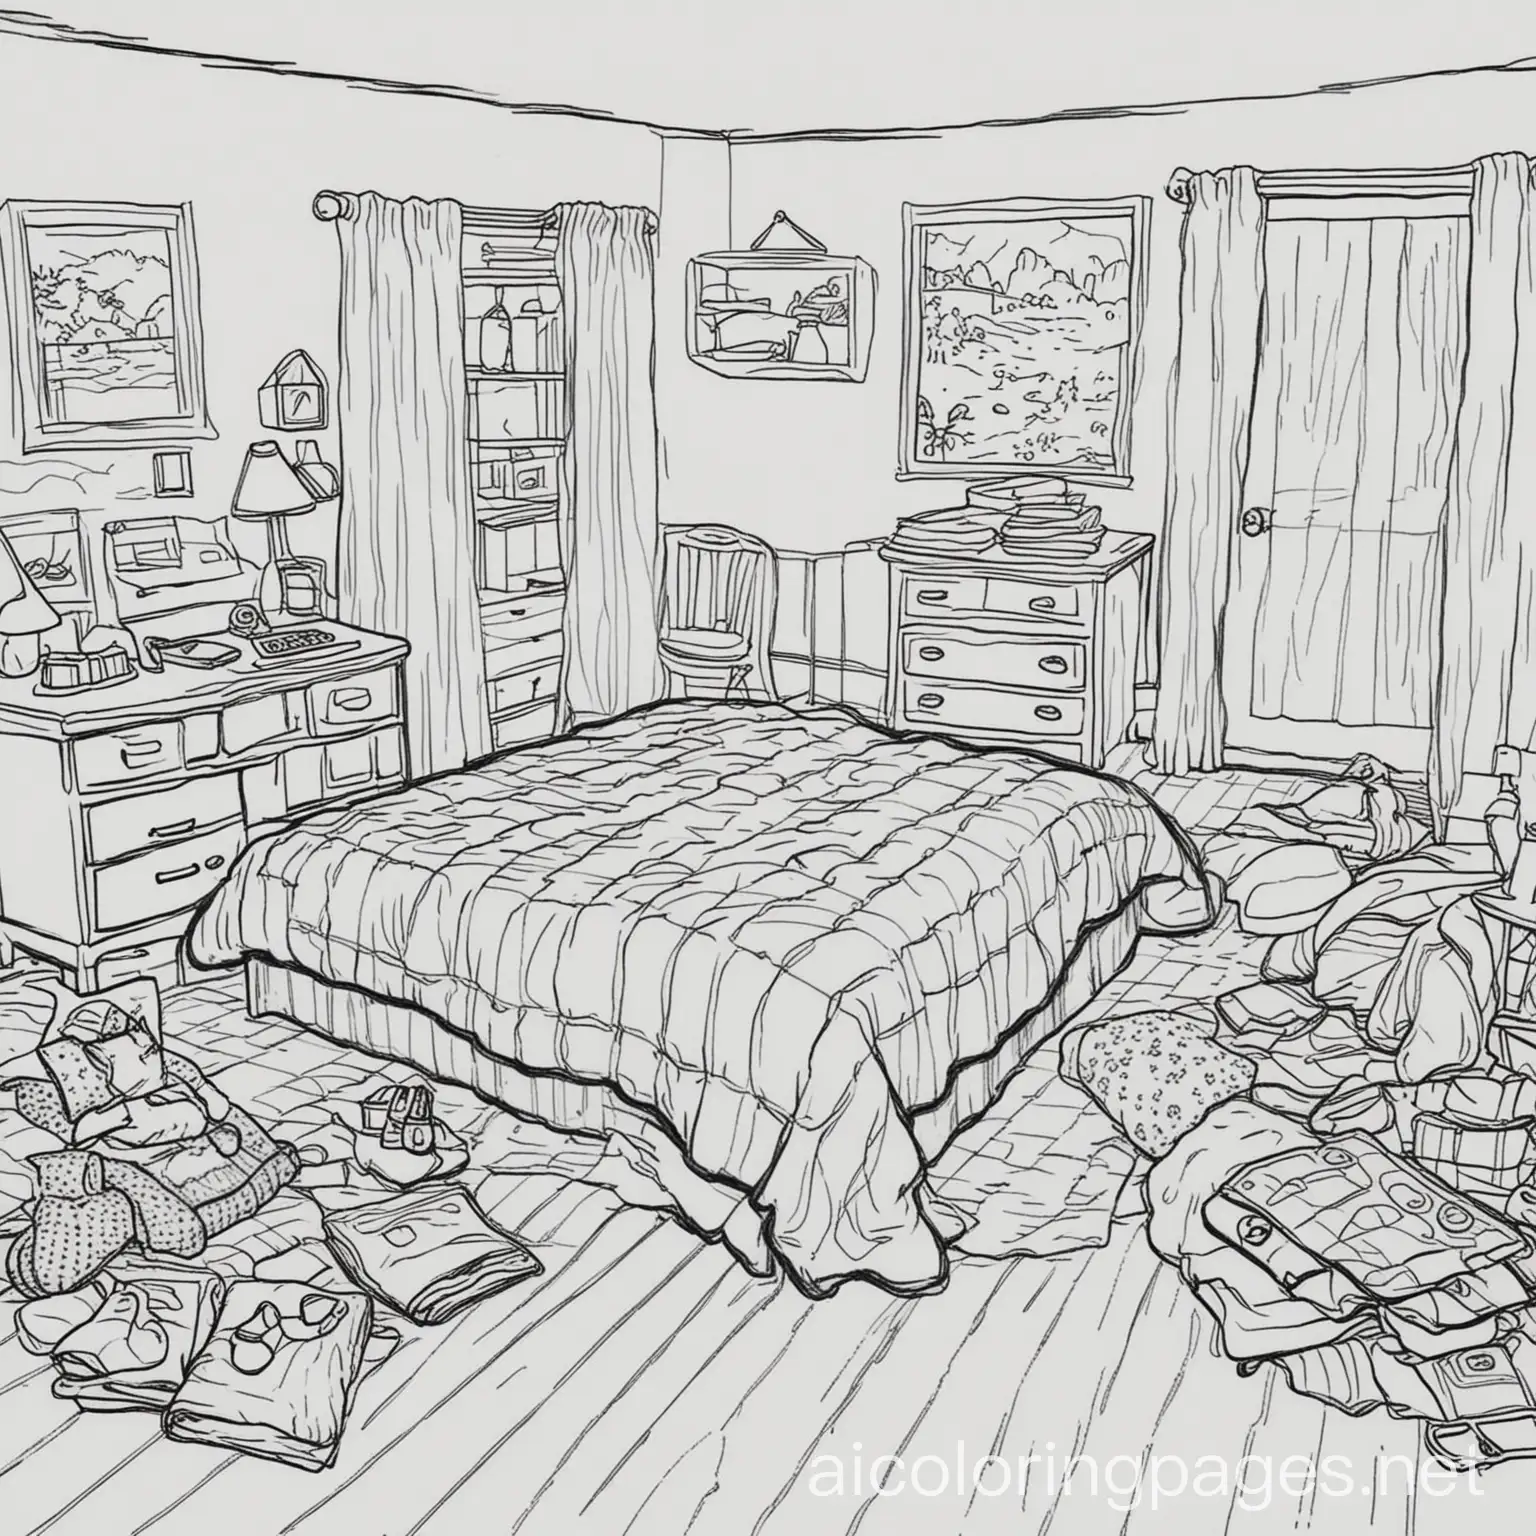 coloring book page, black and white outline, large, messy bedroom, clothes on the floor , Coloring Page, black and white, line art, white background, Simplicity, Ample White Space. The background of the coloring page is plain white to make it easy for young children to color within the lines. The outlines of all the subjects are easy to distinguish, making it simple for kids to color without too much difficulty